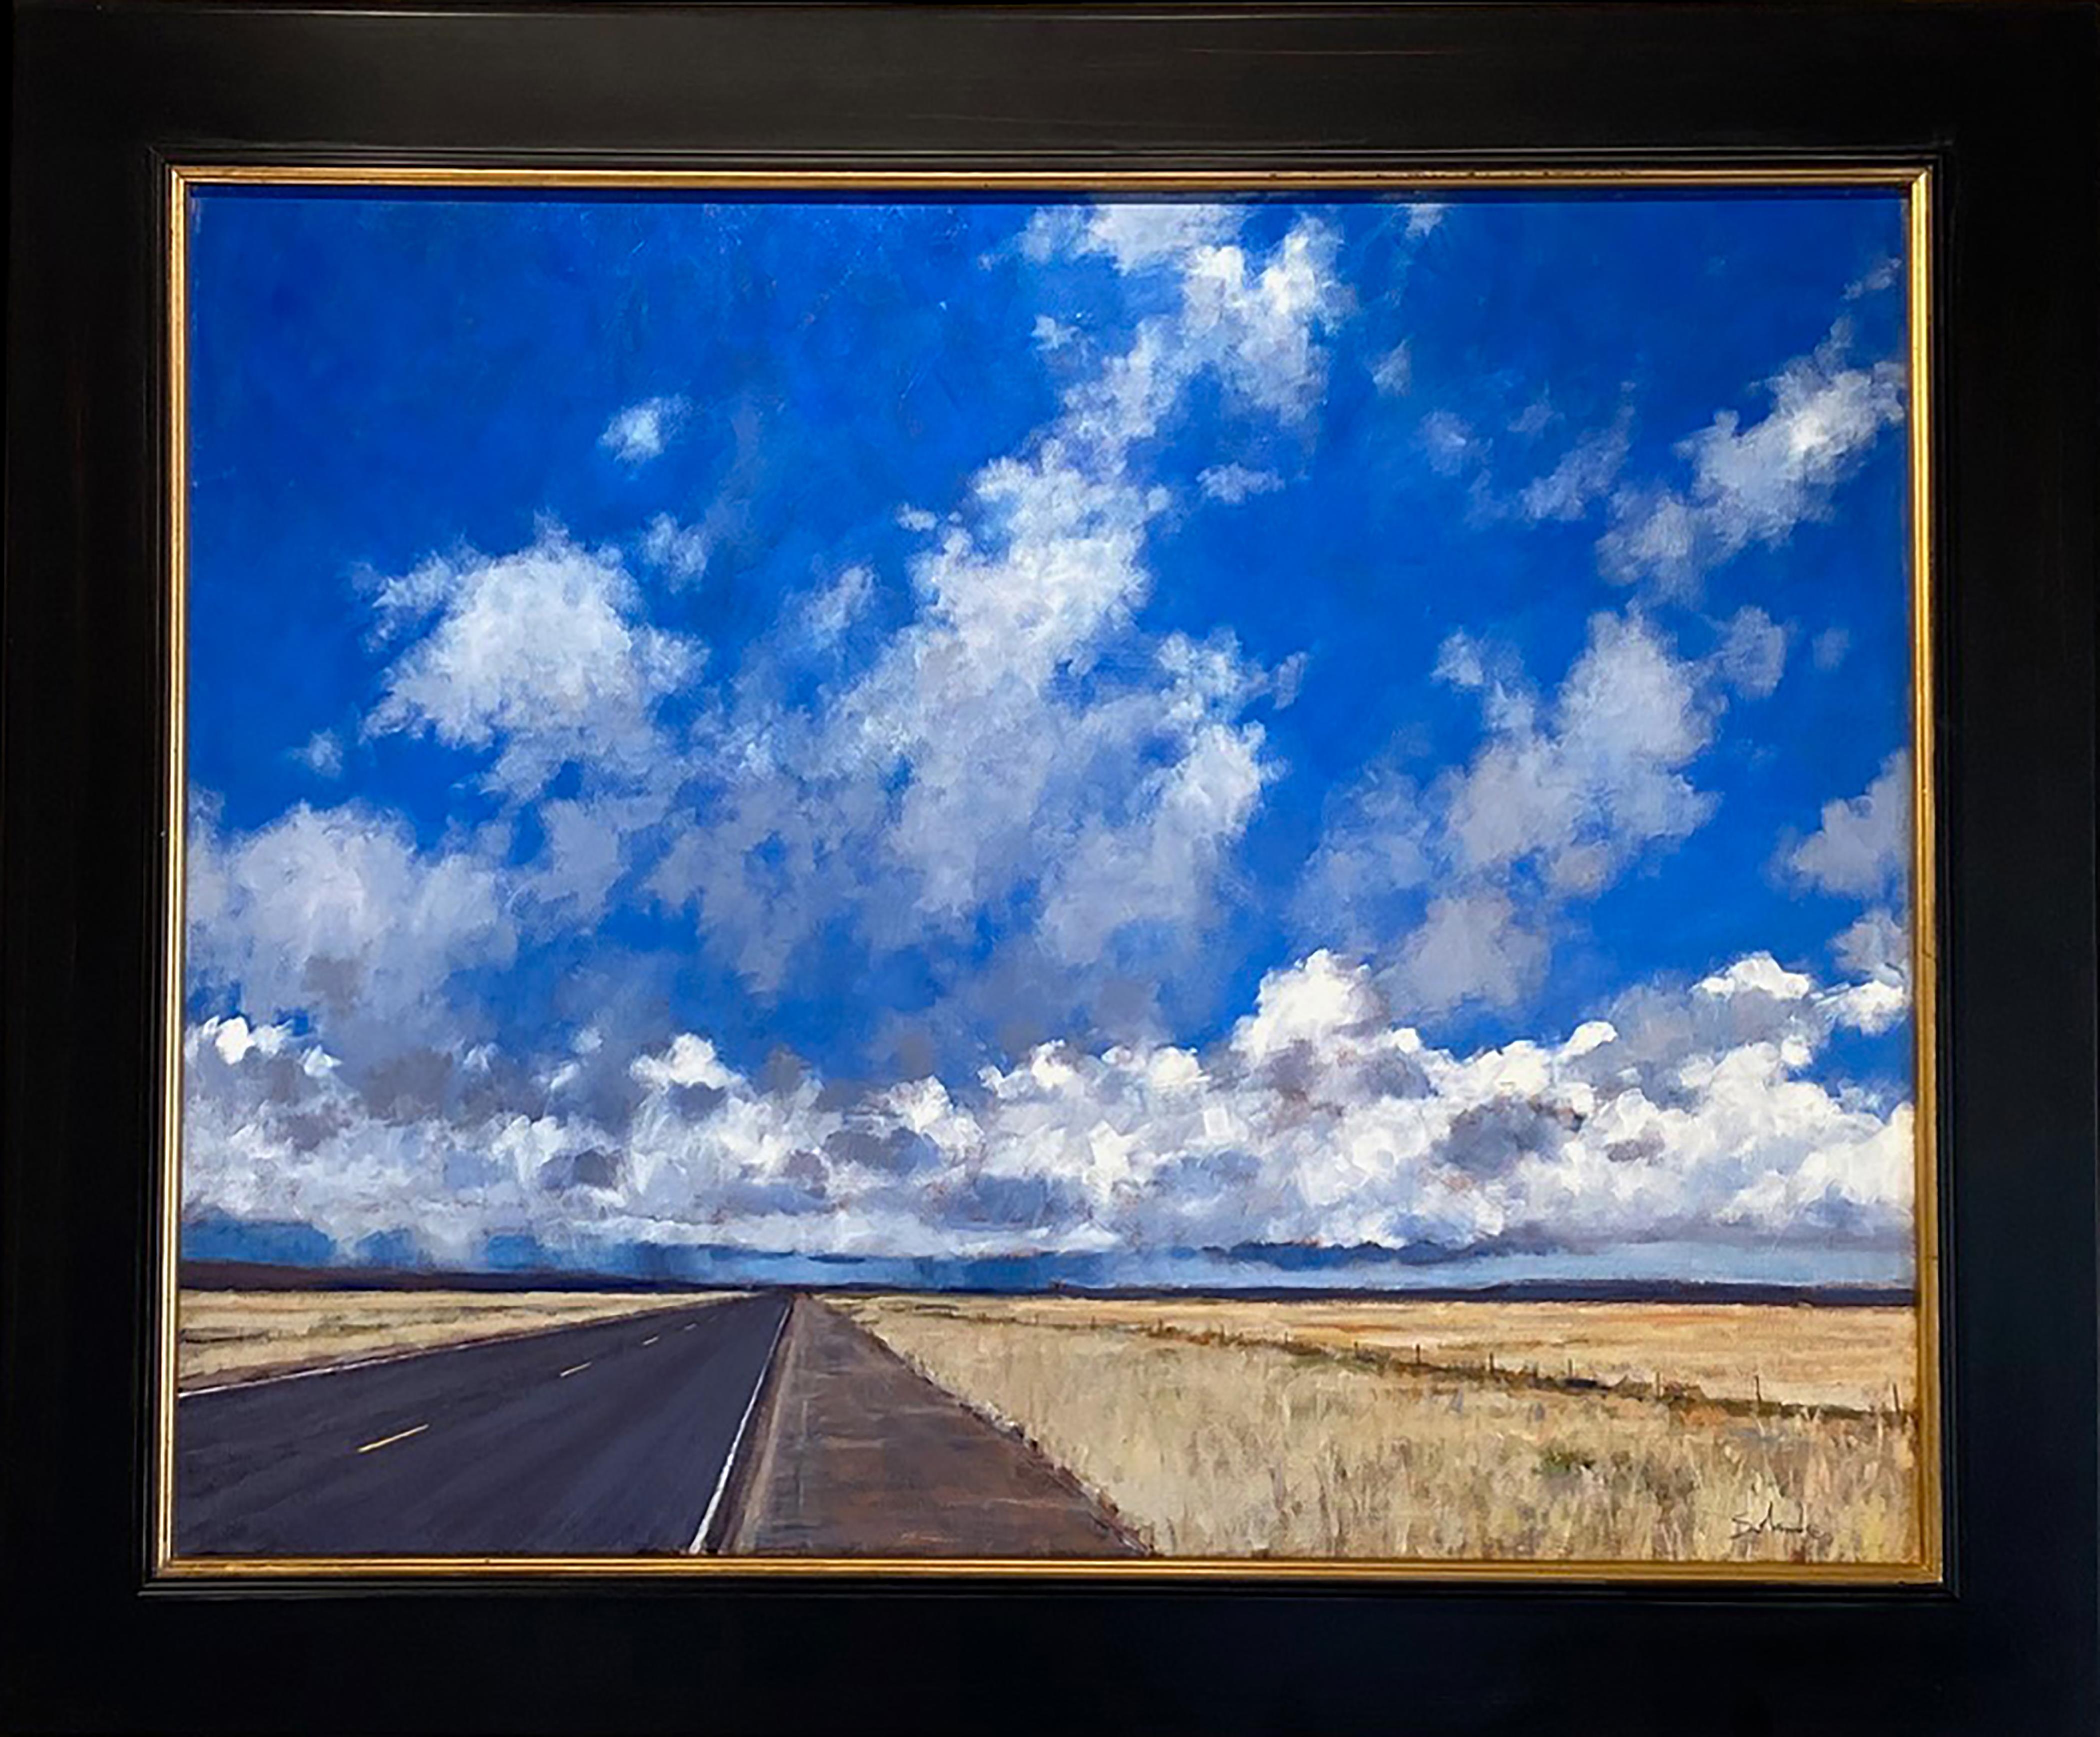 No More Speed, I'm Almost There! (Open road, adventure, moody sky, puffy clouds) - Painting by Nathan Solano